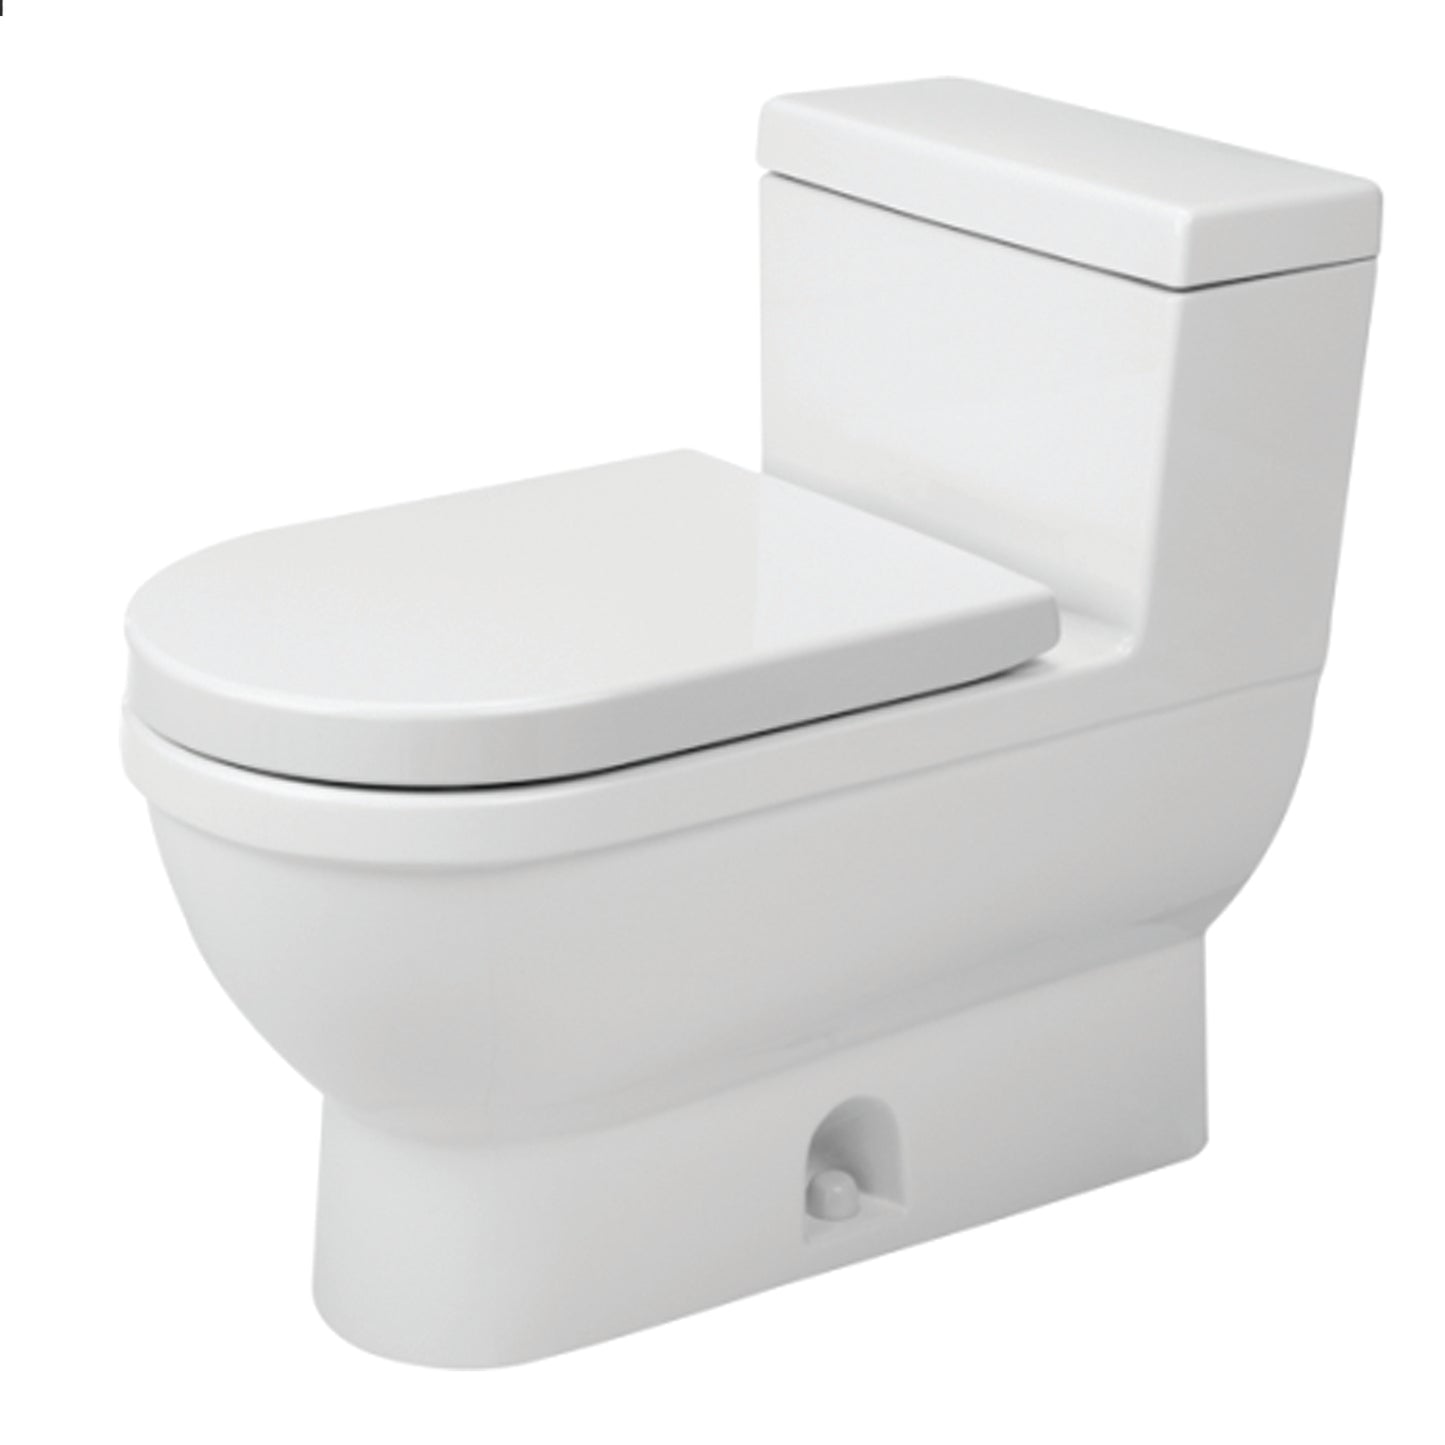 Duravit Philippe Starck 3 1pc Elongated U.S. Type Toilet with syphonic jet action 212001.0001